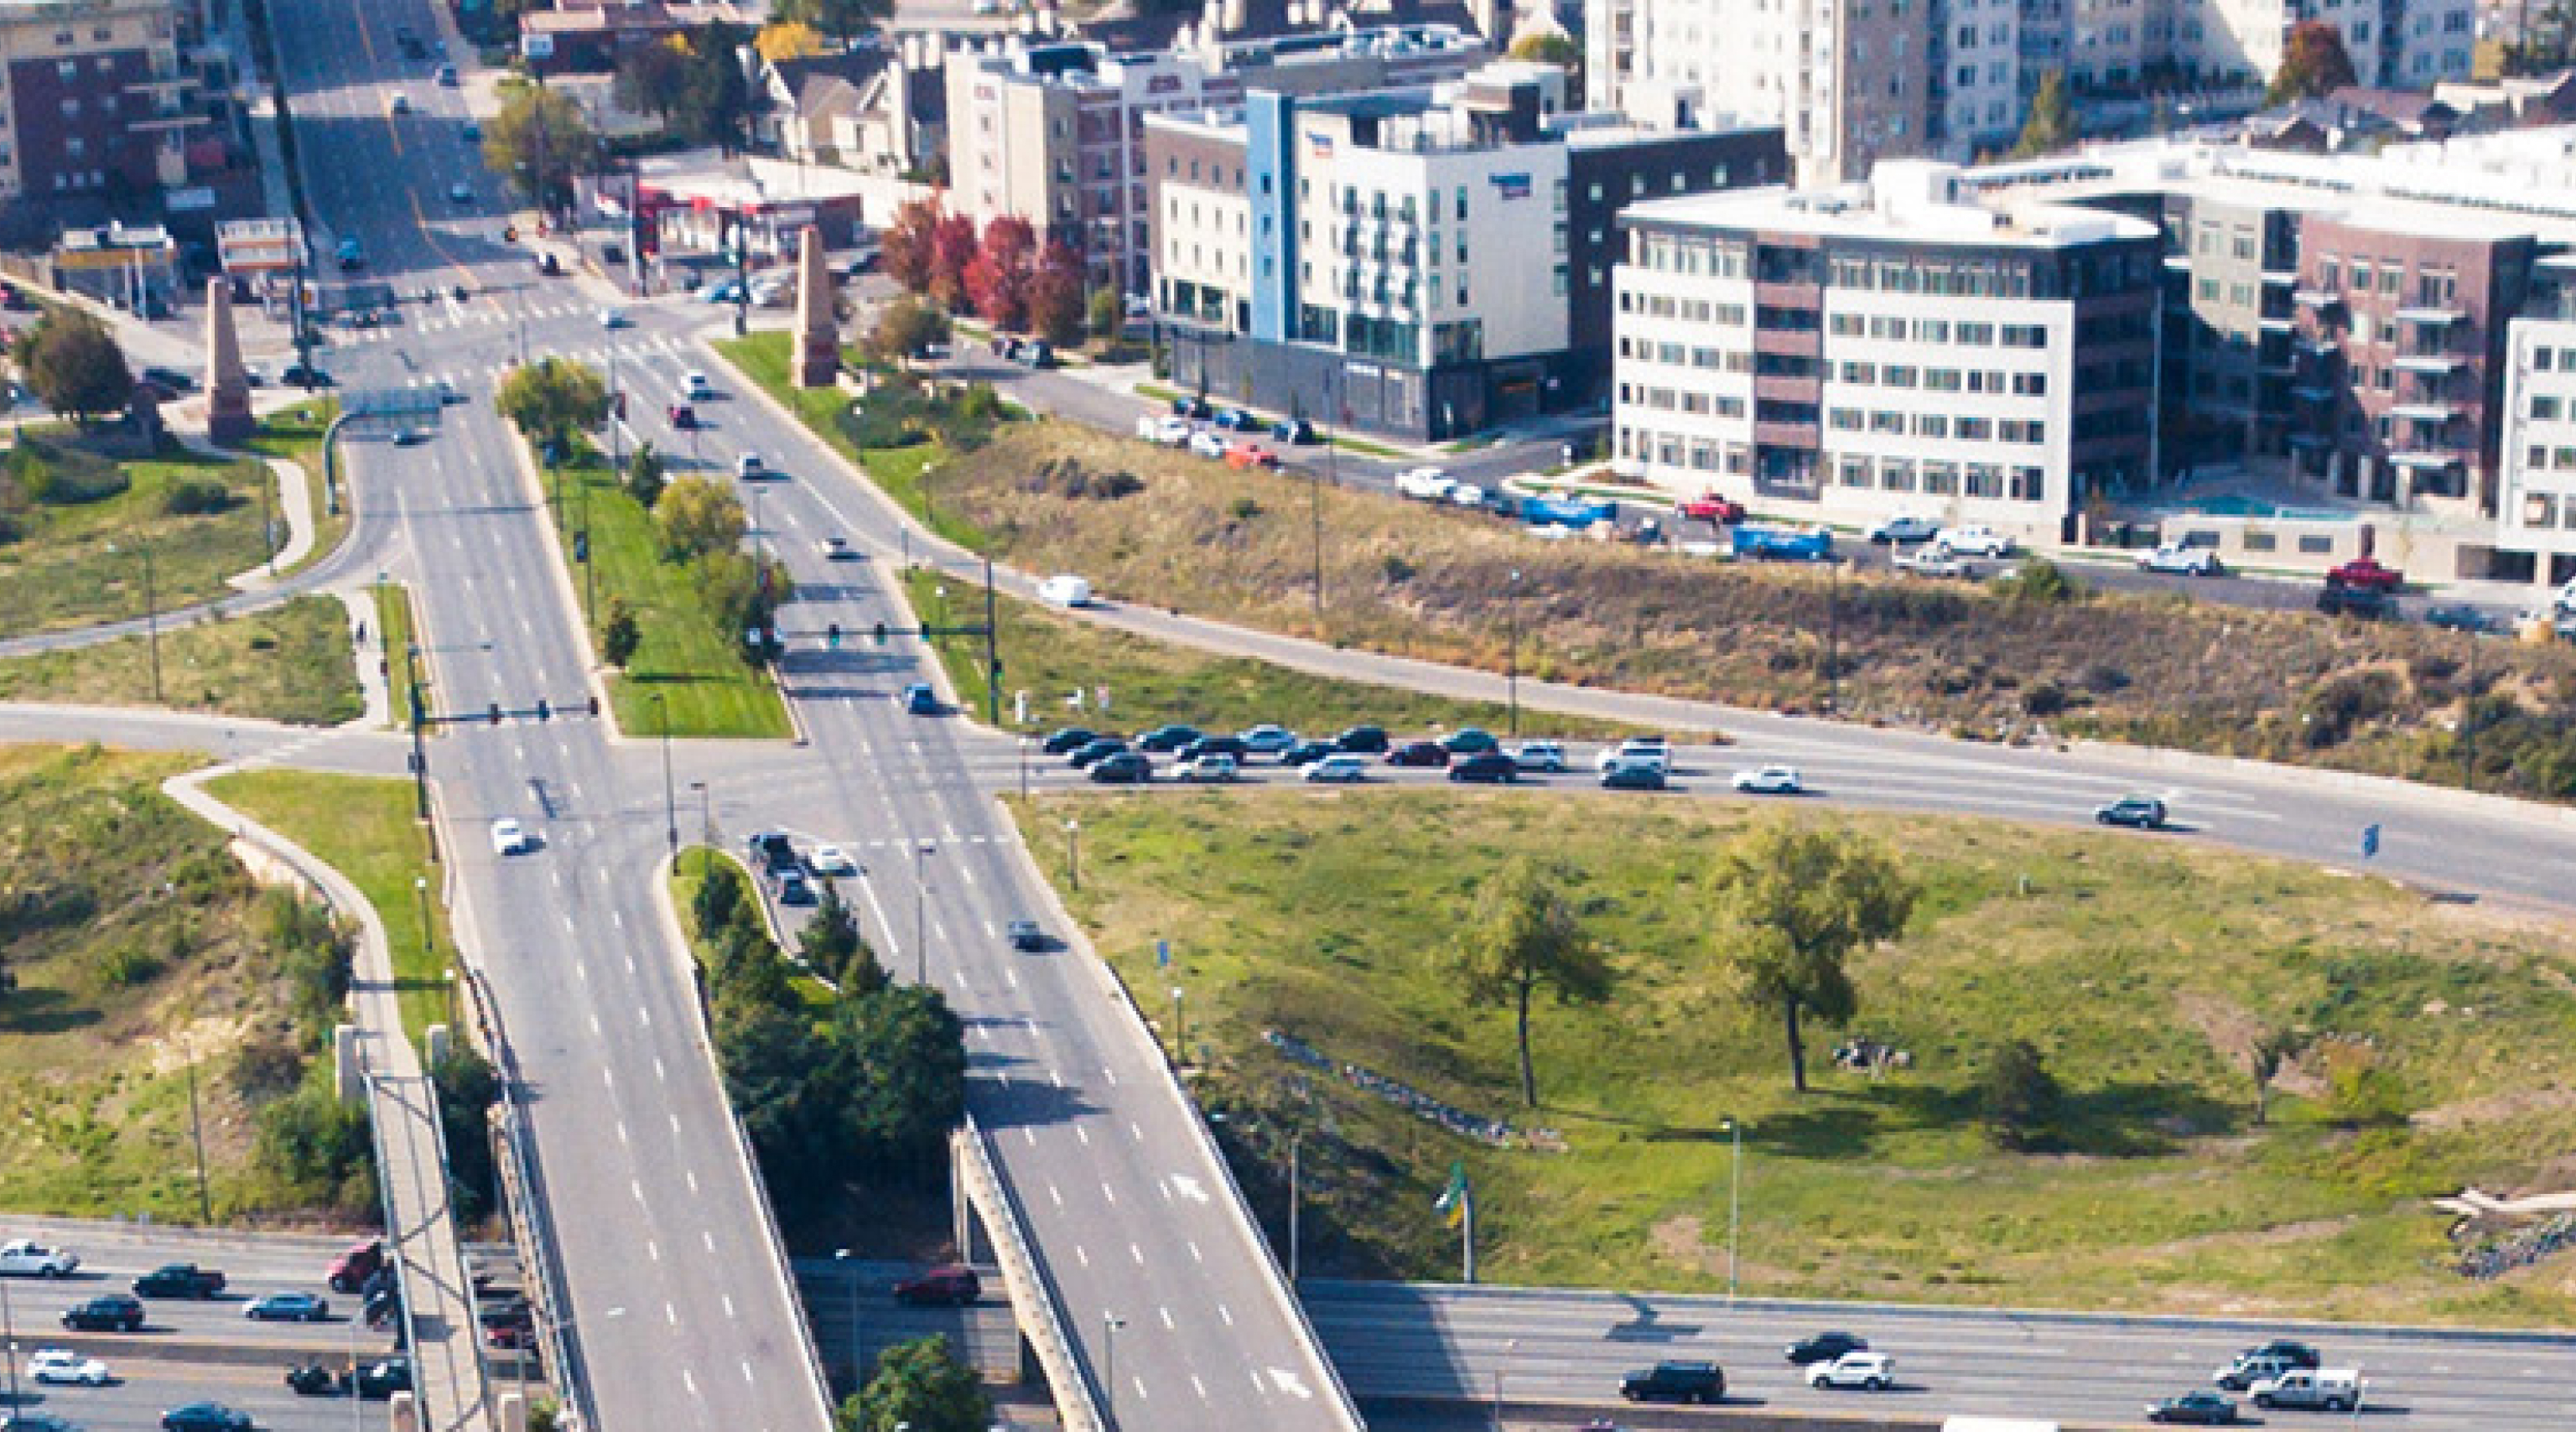 Aerial view of a roadway near buildings